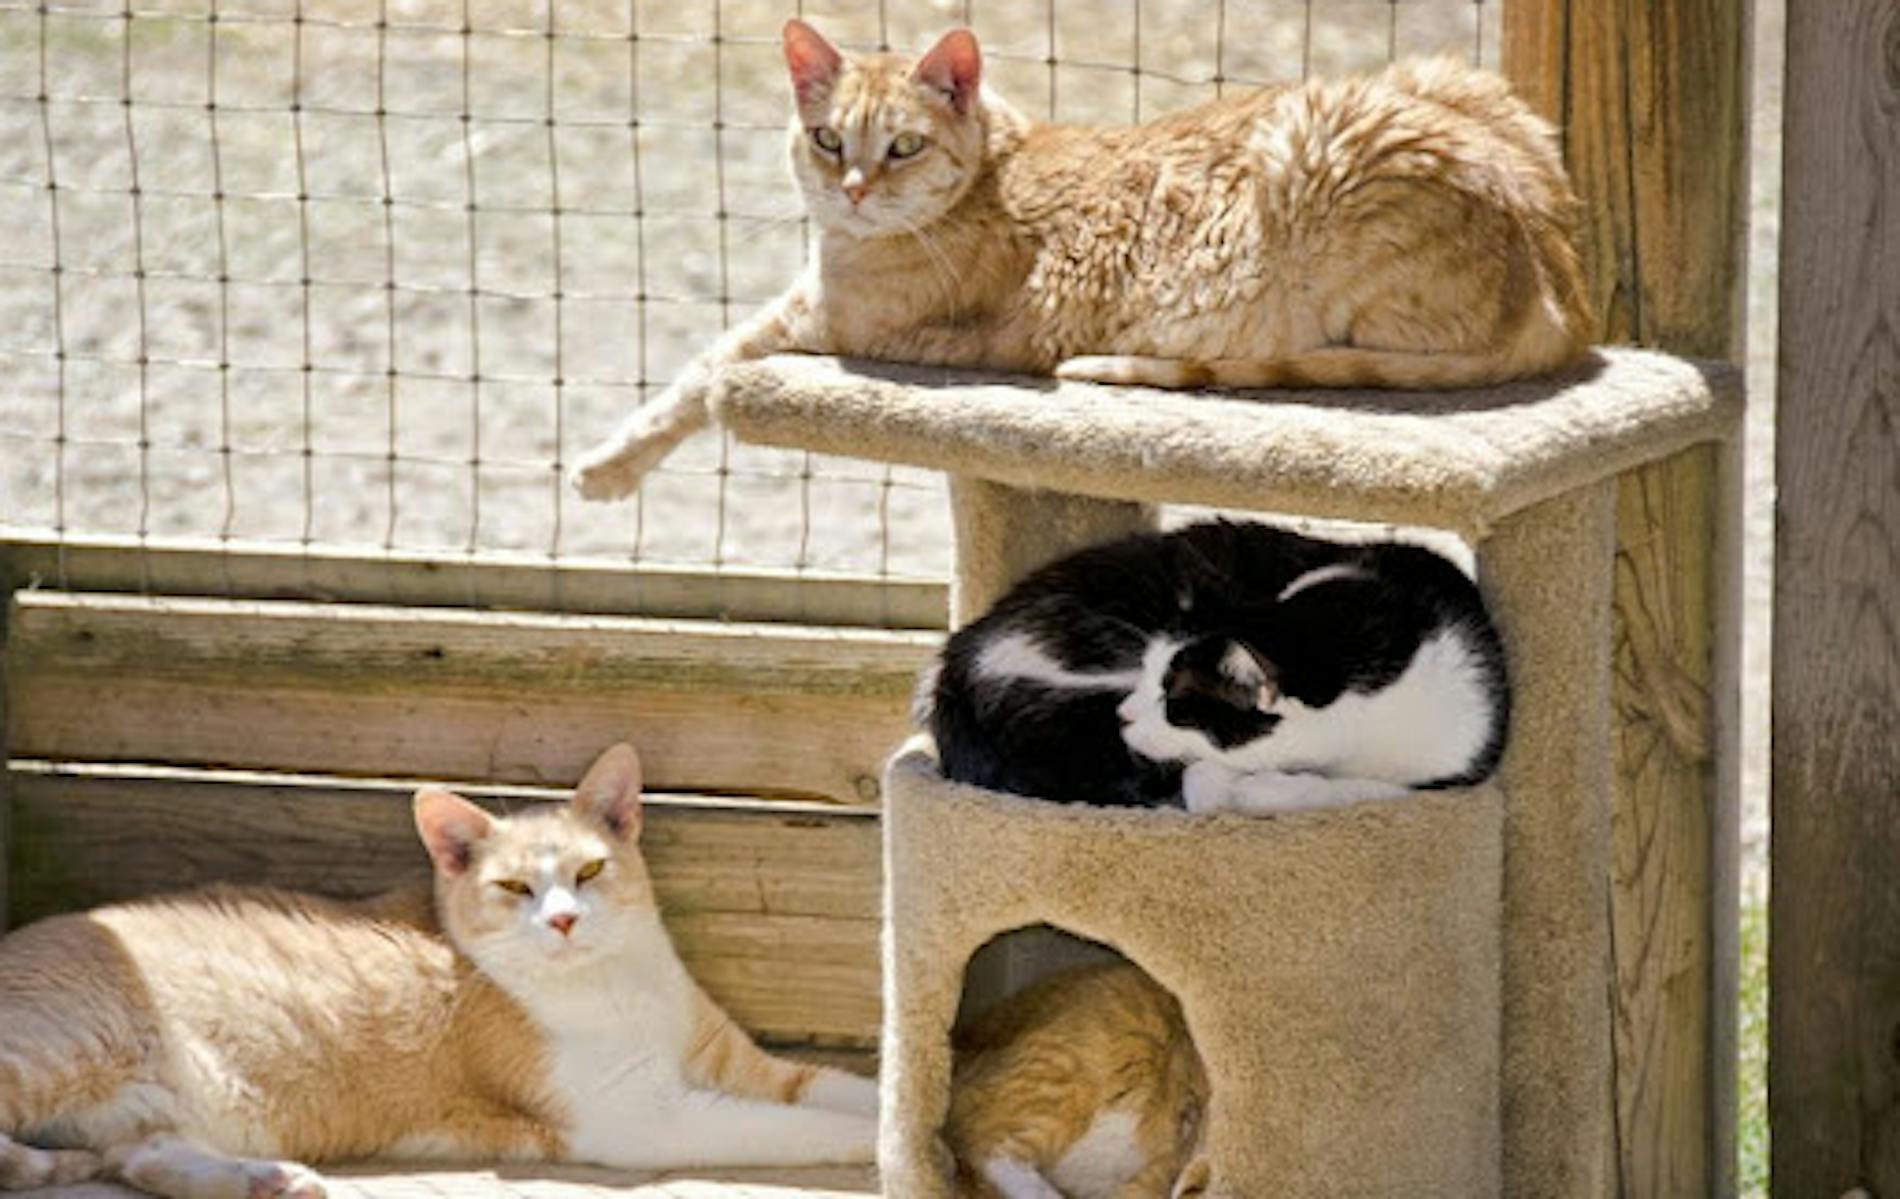 Cats in kennel